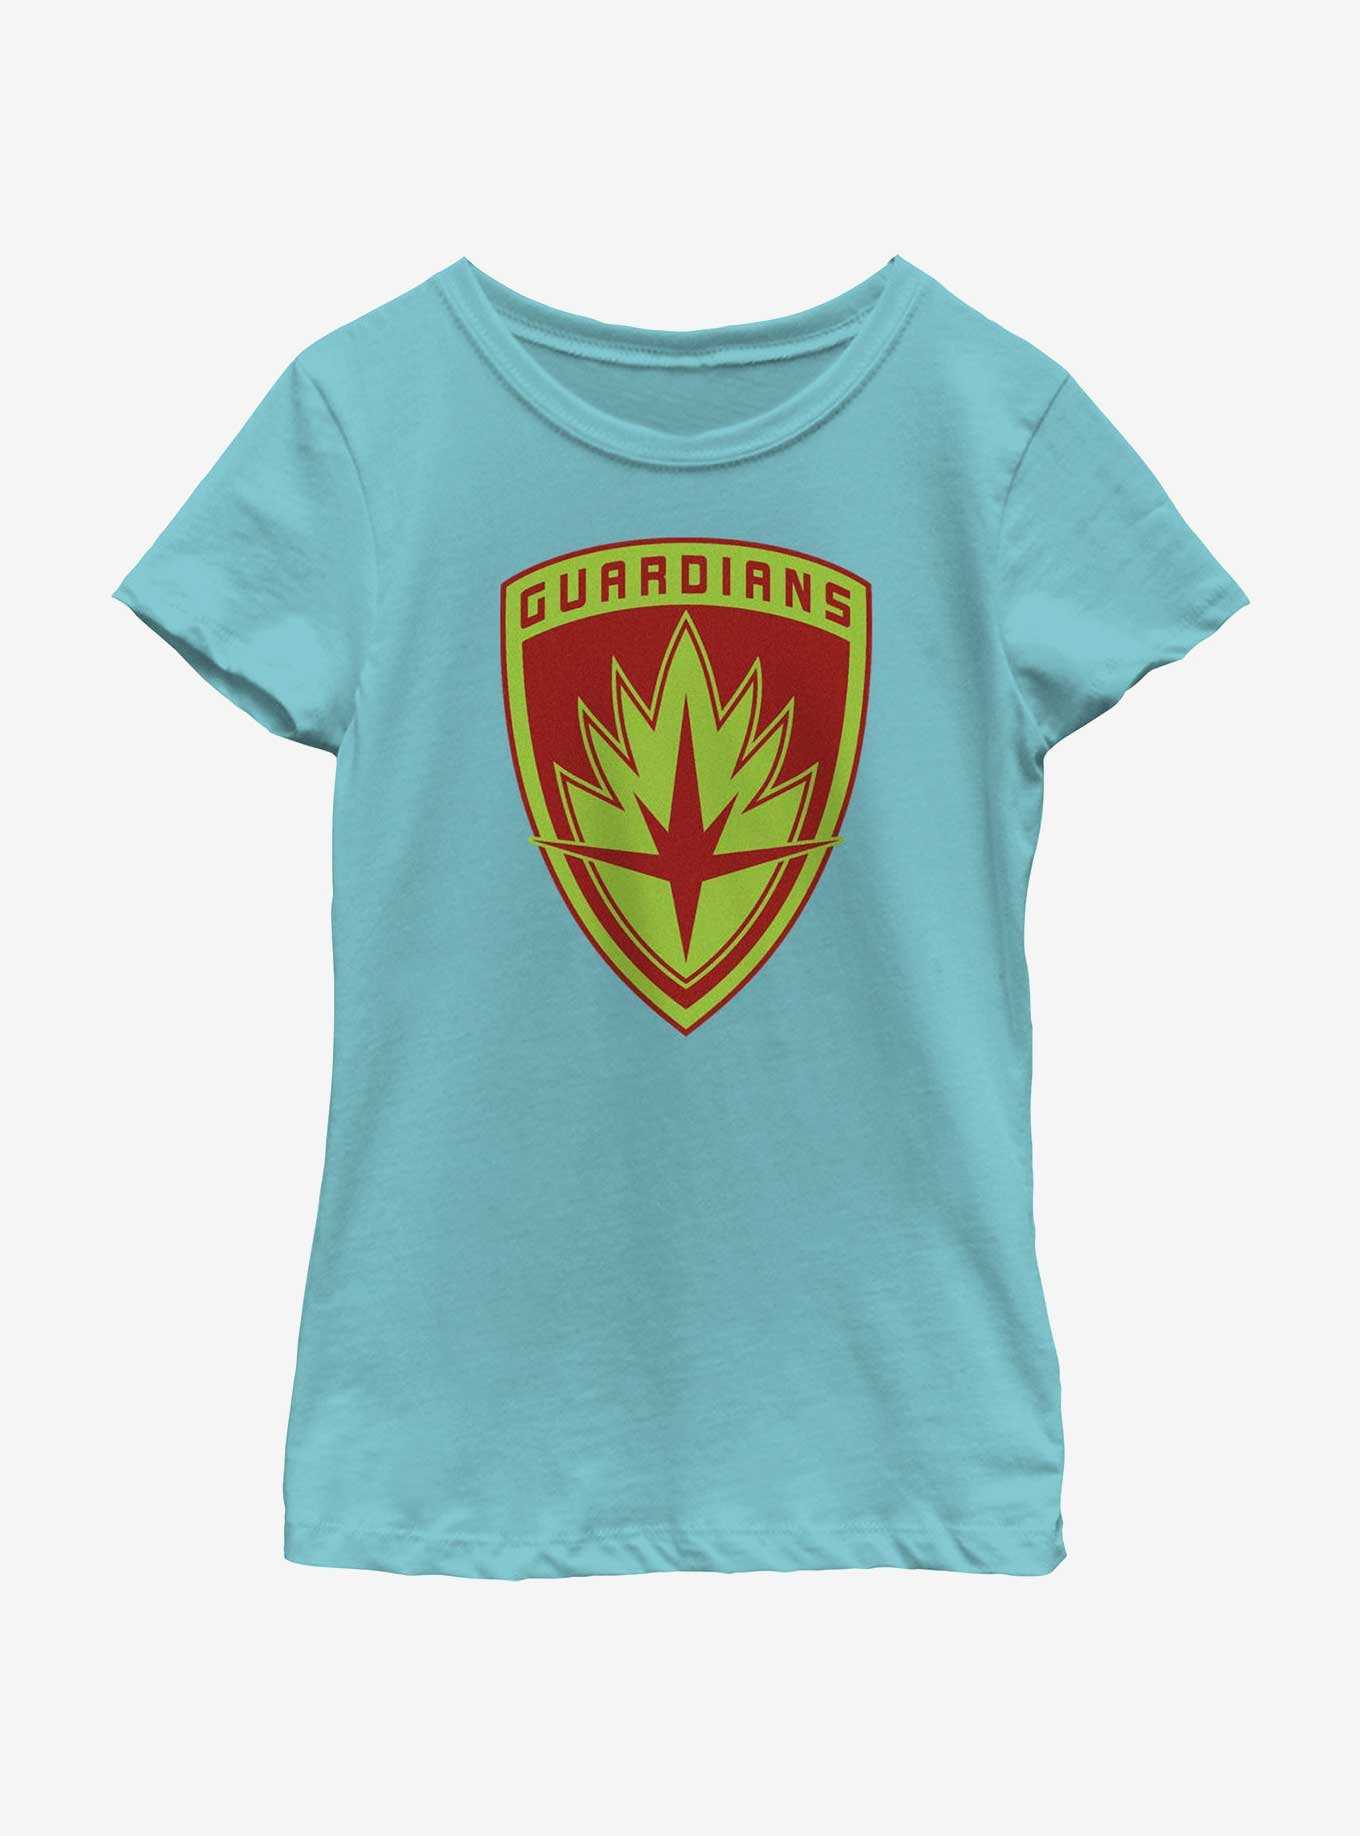 Marvel Guardians of the Galaxy Guardian Badge Youth Girls T-Shirt, , hi-res